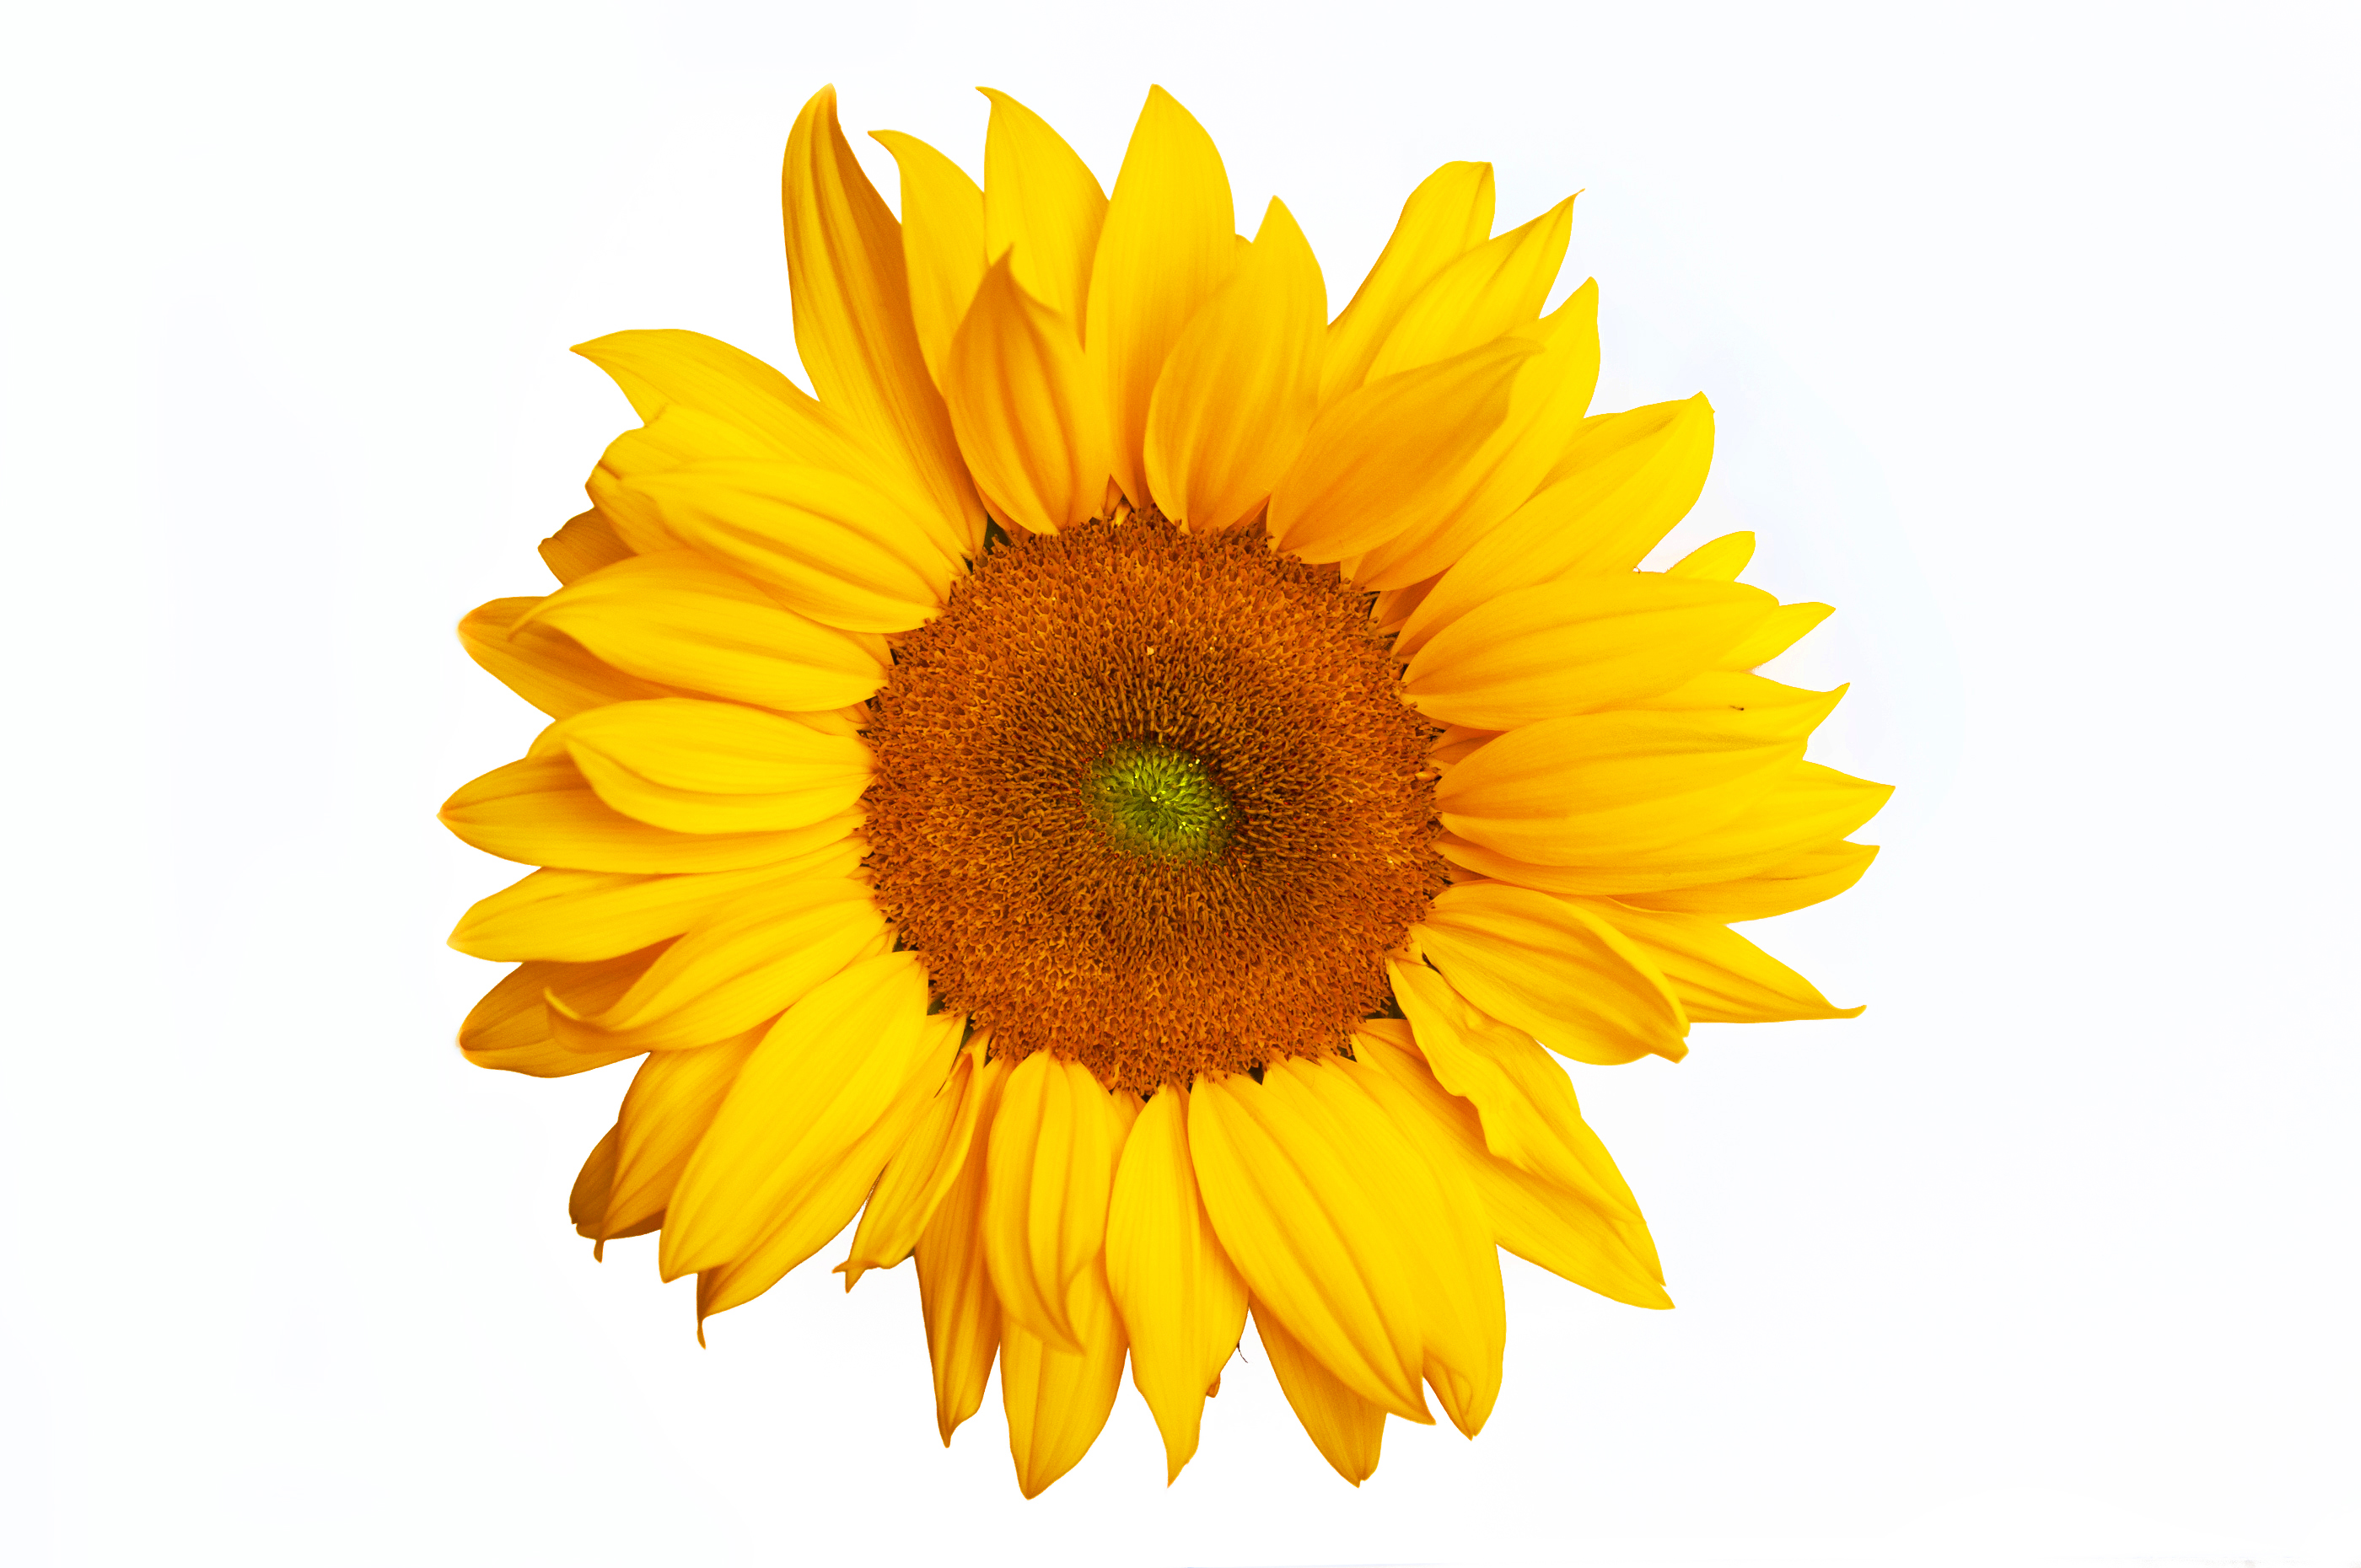 Free photo: Sunflower isolated on white background - Agriculture